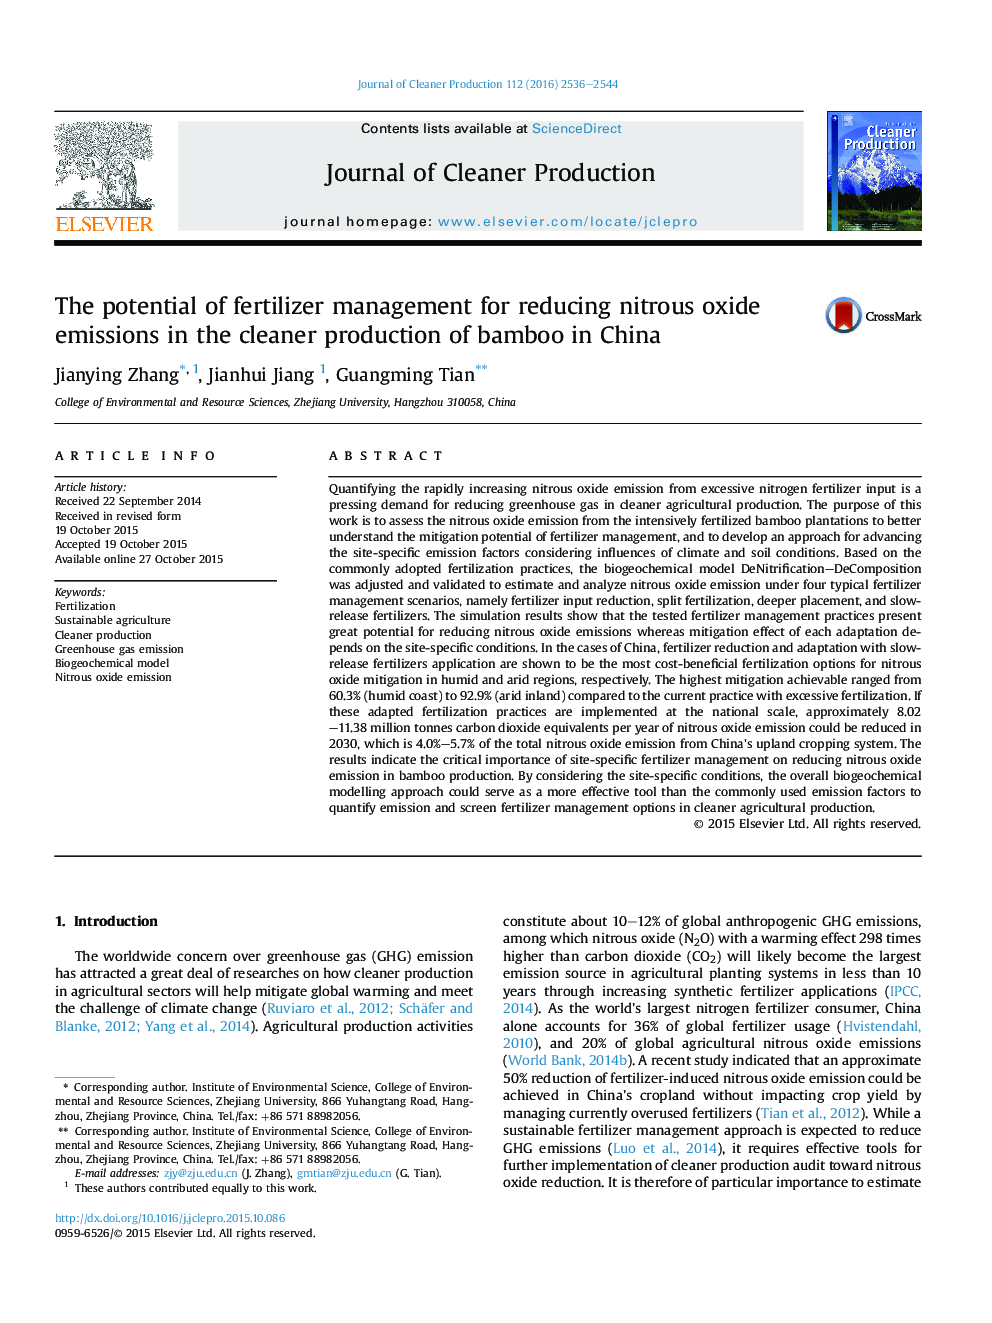 The potential of fertilizer management for reducing nitrous oxide emissions in the cleaner production of bamboo in China